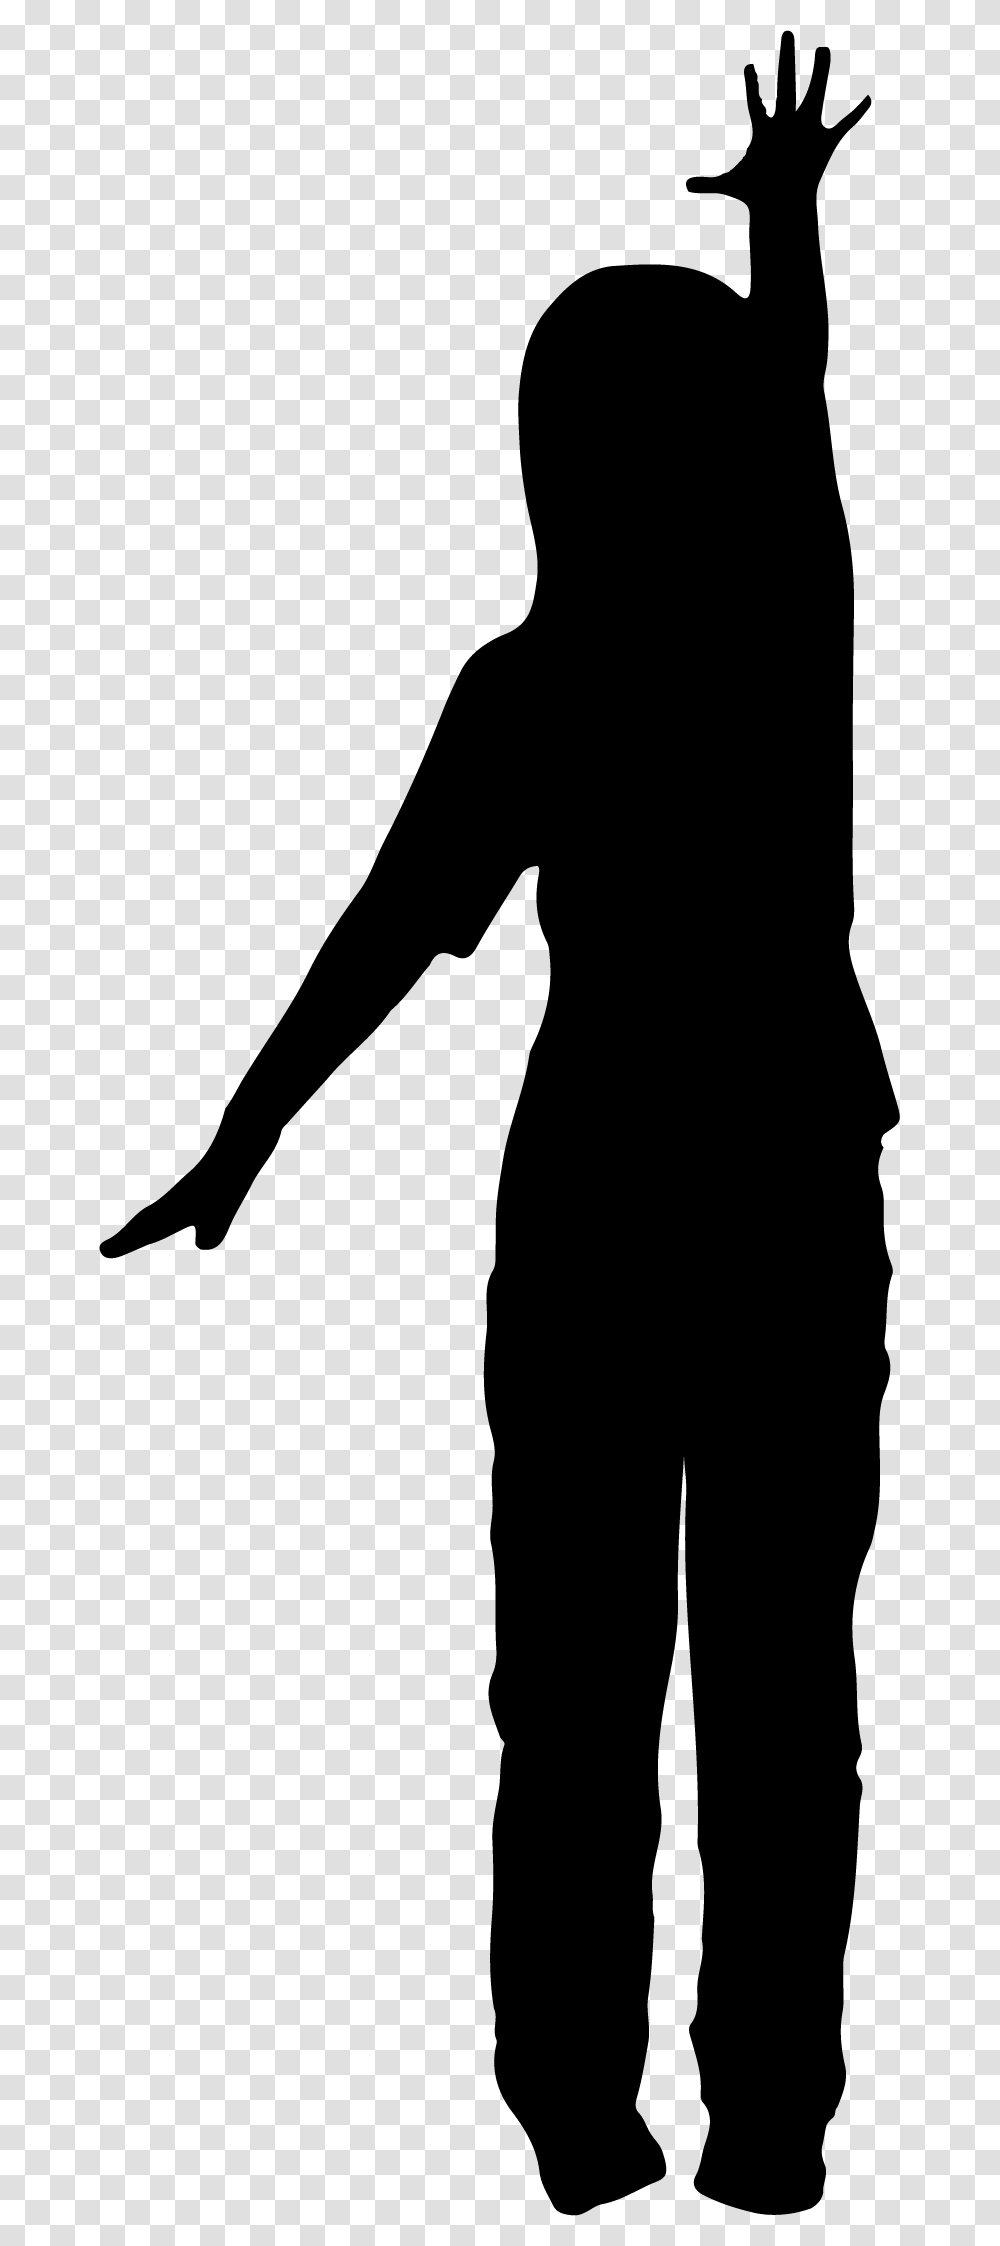 Reaching Silhouette Kid Reaching Up, Person, Kneeling, Photography, Standing Transparent Png